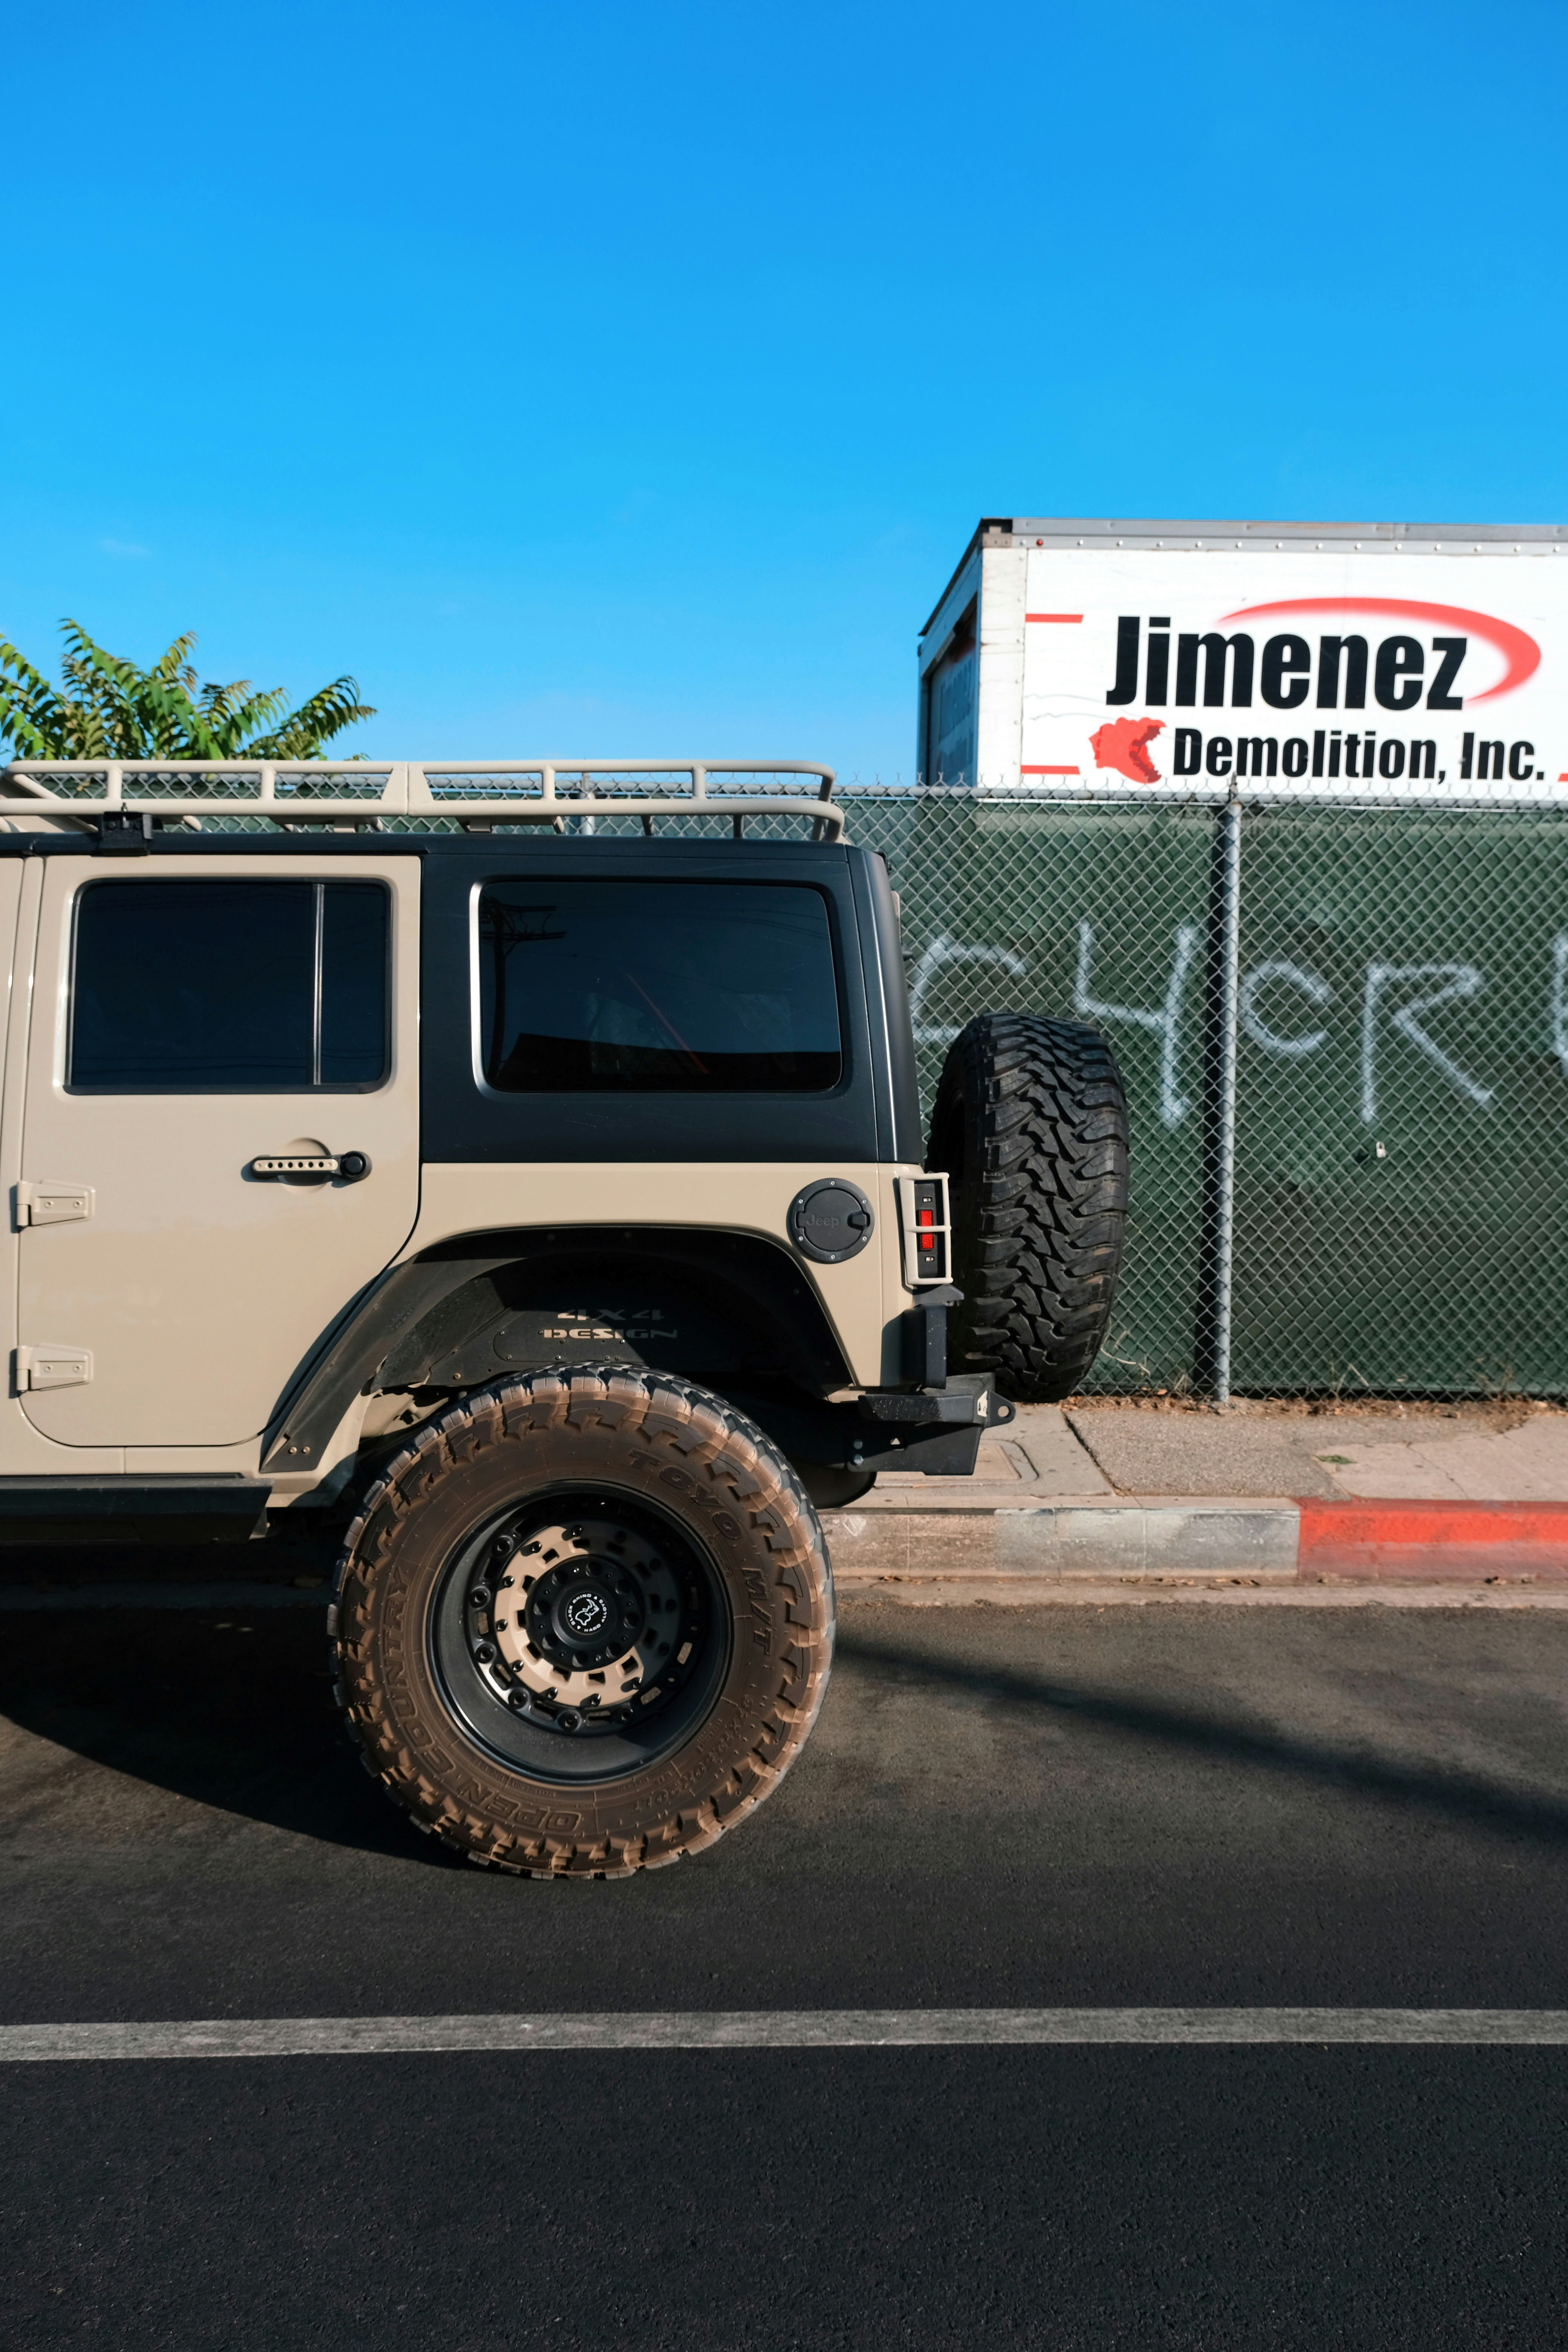 white and black jeep wrangler parked near gray metal fence during daytime